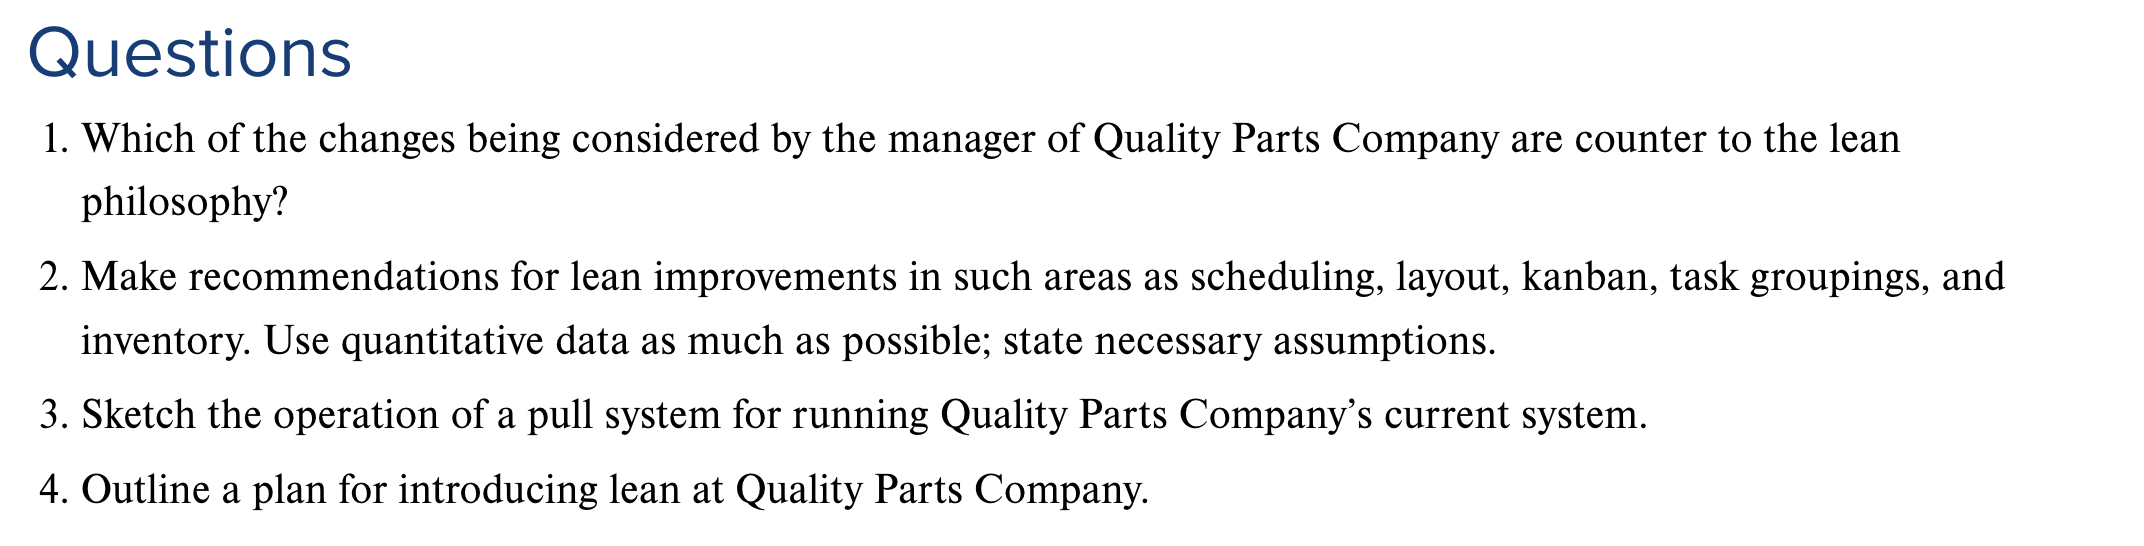 Solved CASE: QUALITY PARTS COMPANY Page 423 Quality Parts | Chegg.com